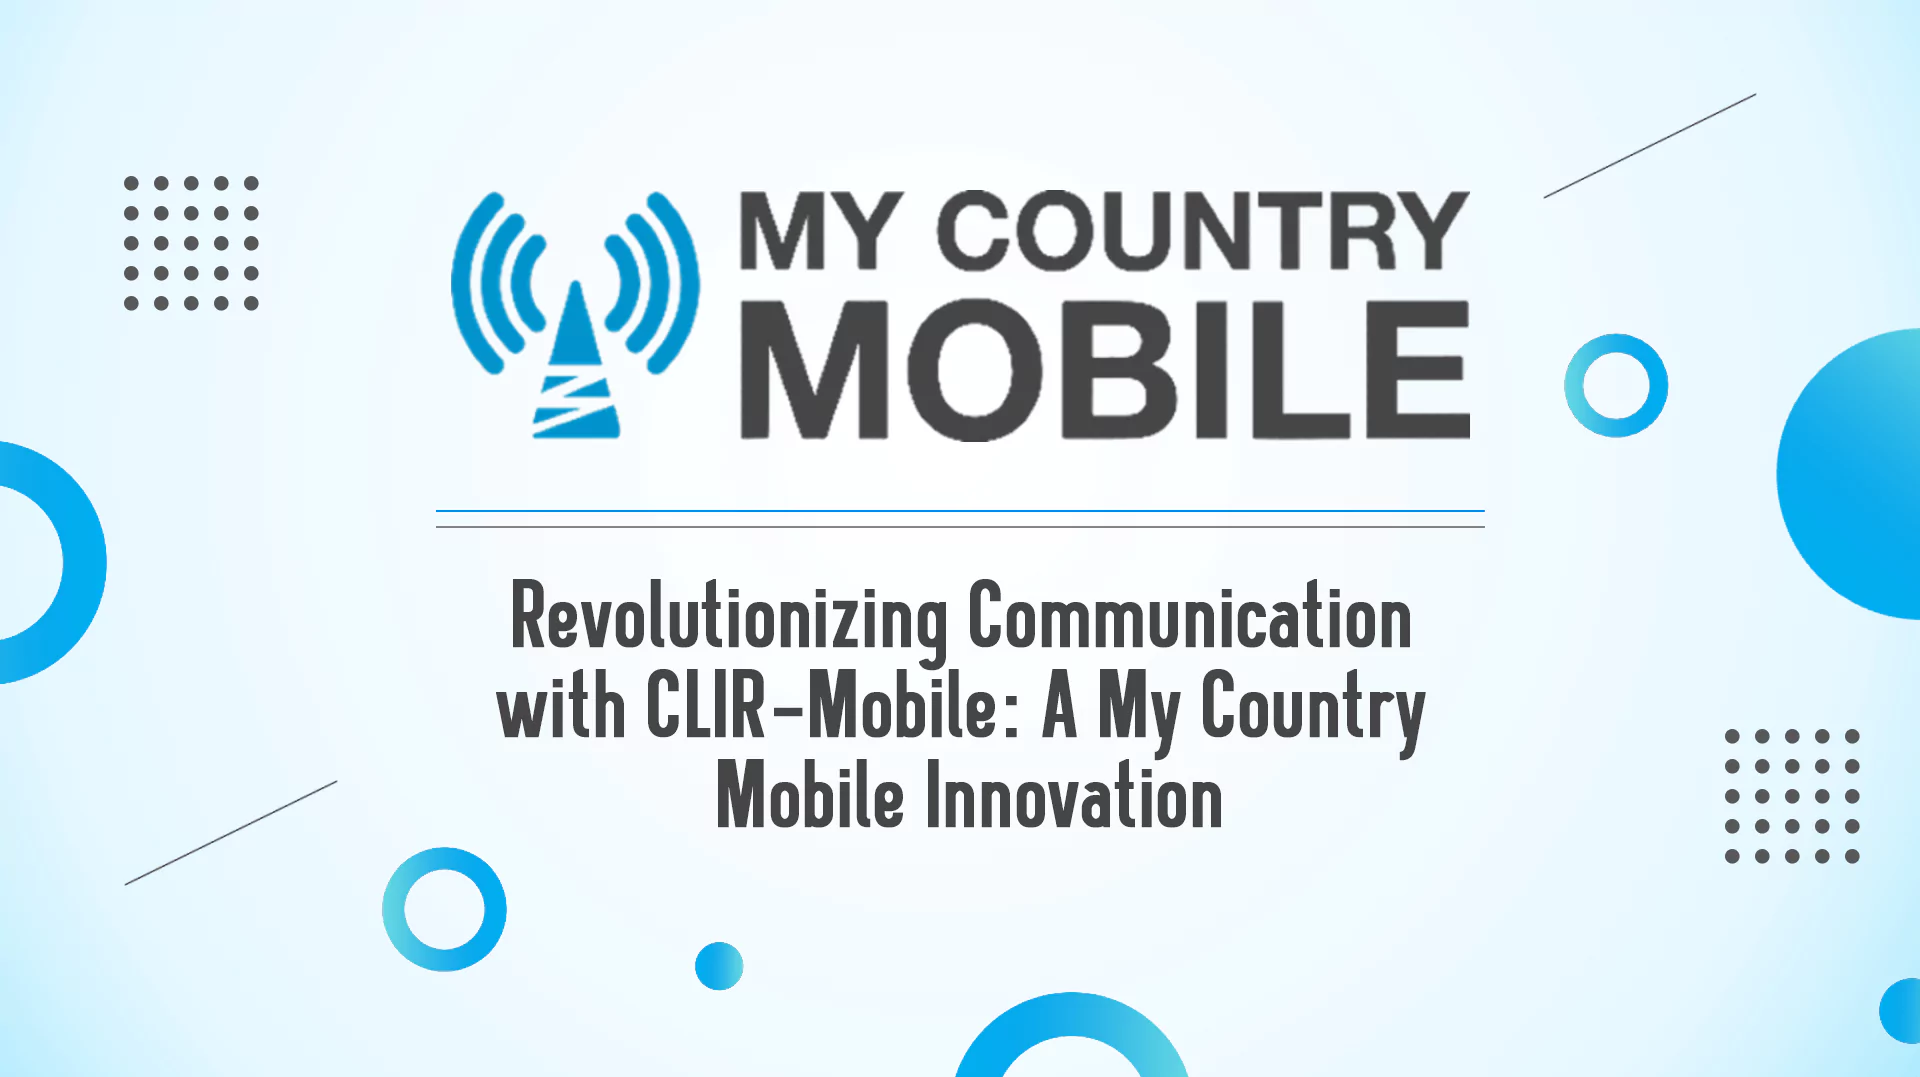 Revolutionizing Communication with CLIR-Mobile A My Country Mobile Innovation